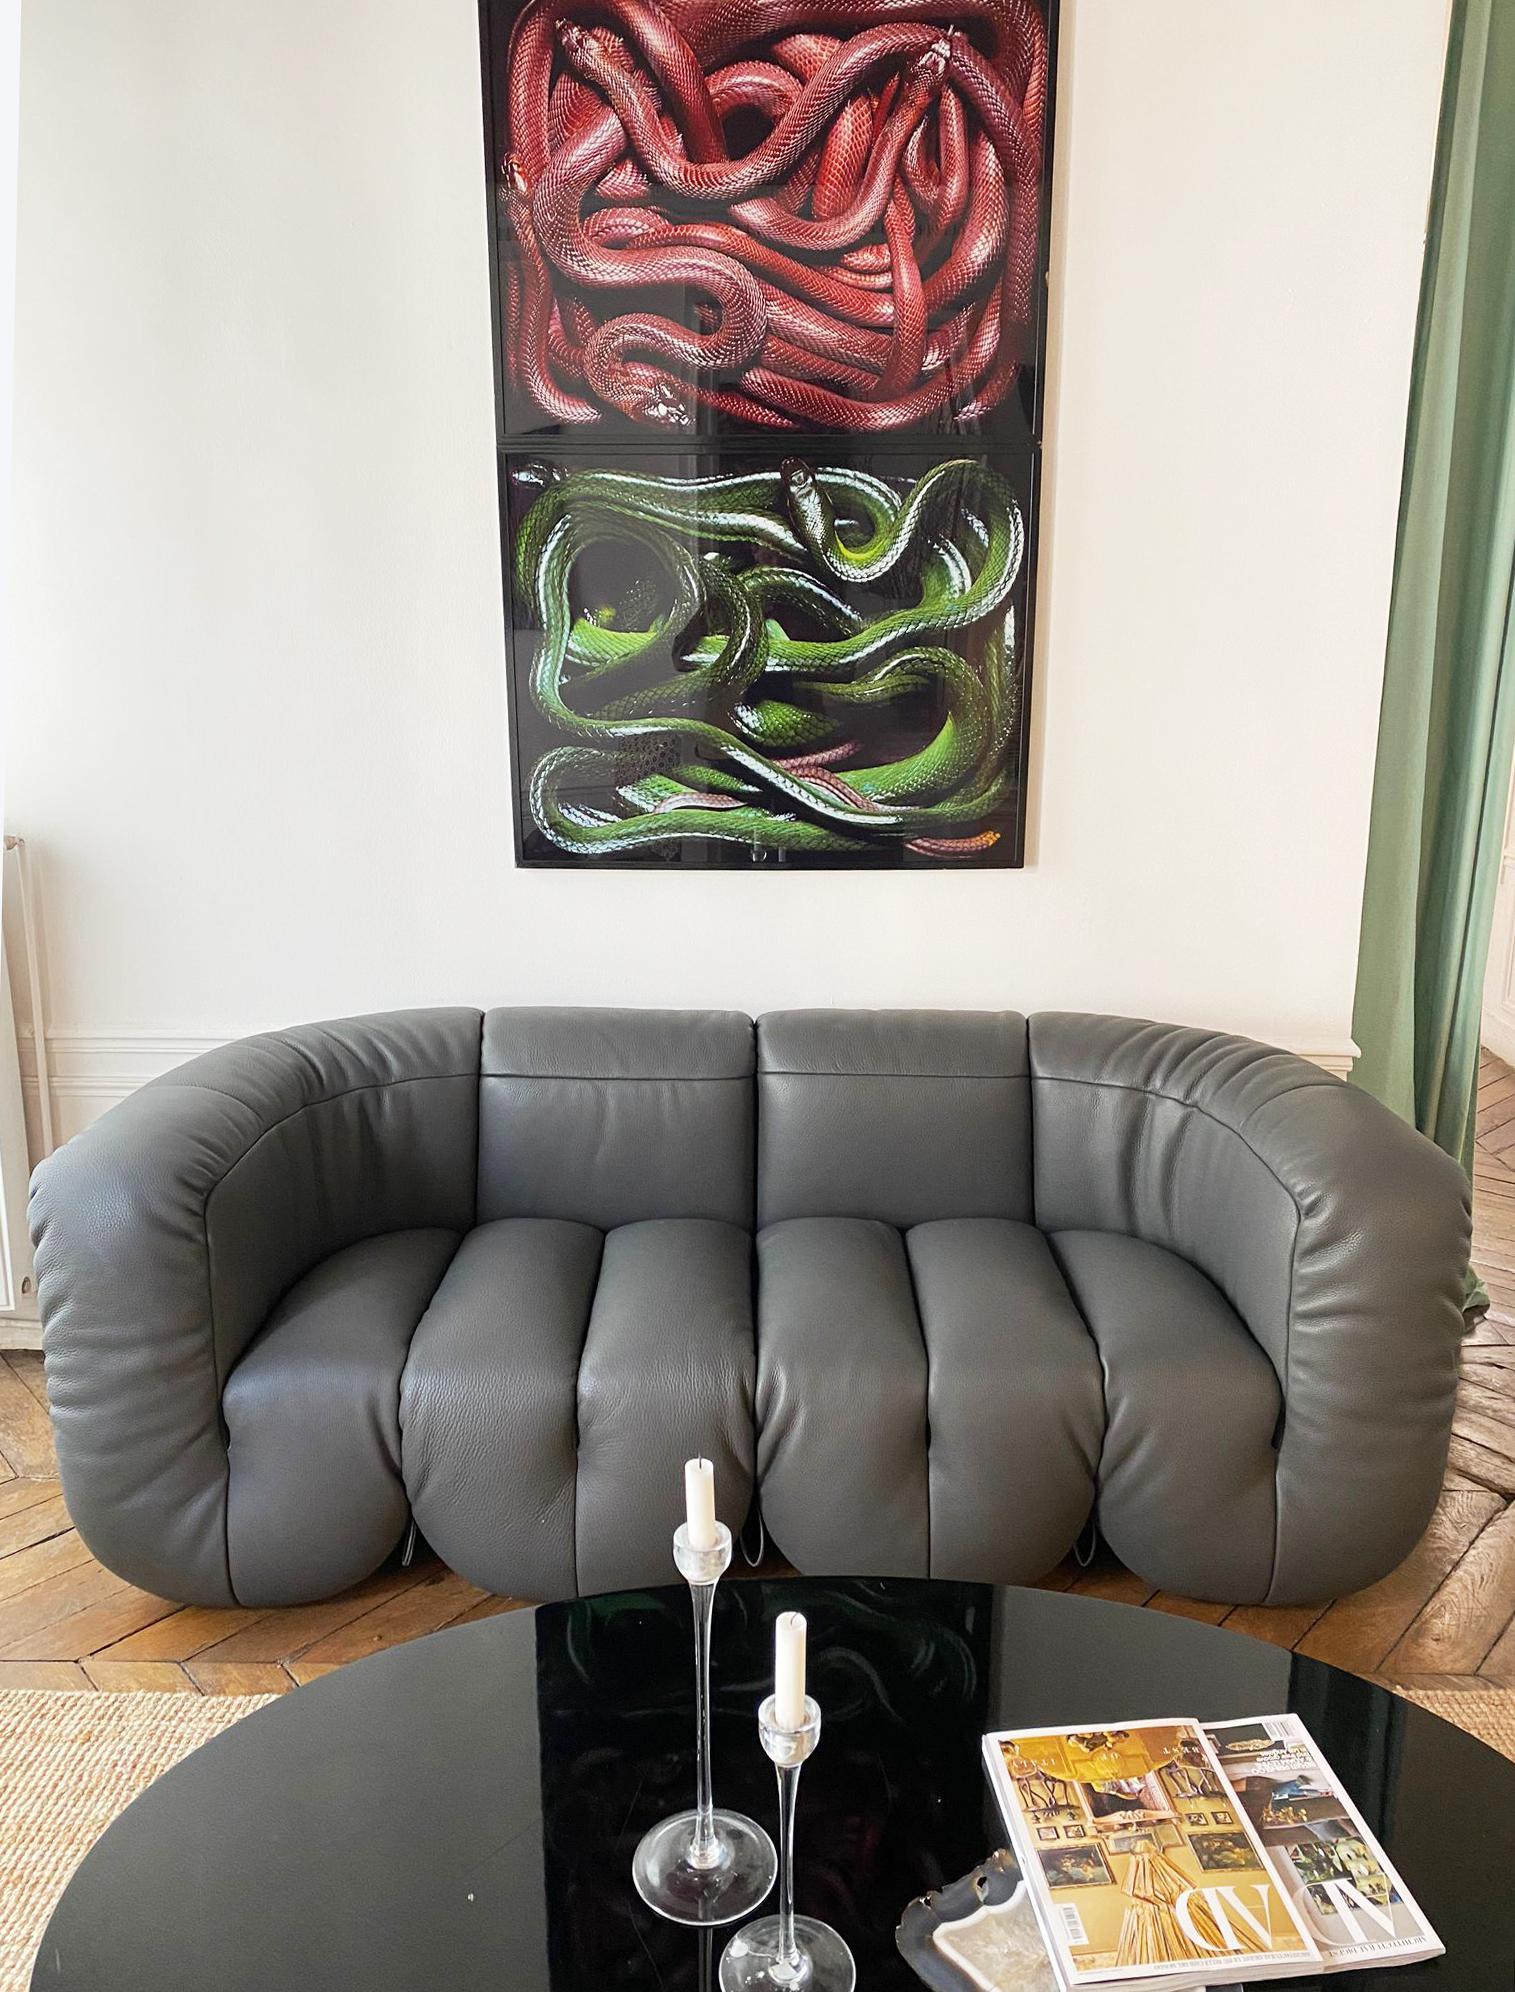 Modern De Sede DS-707 Sofa in Perla Touch Leather Upholstery by Philippe Malouin For Sale